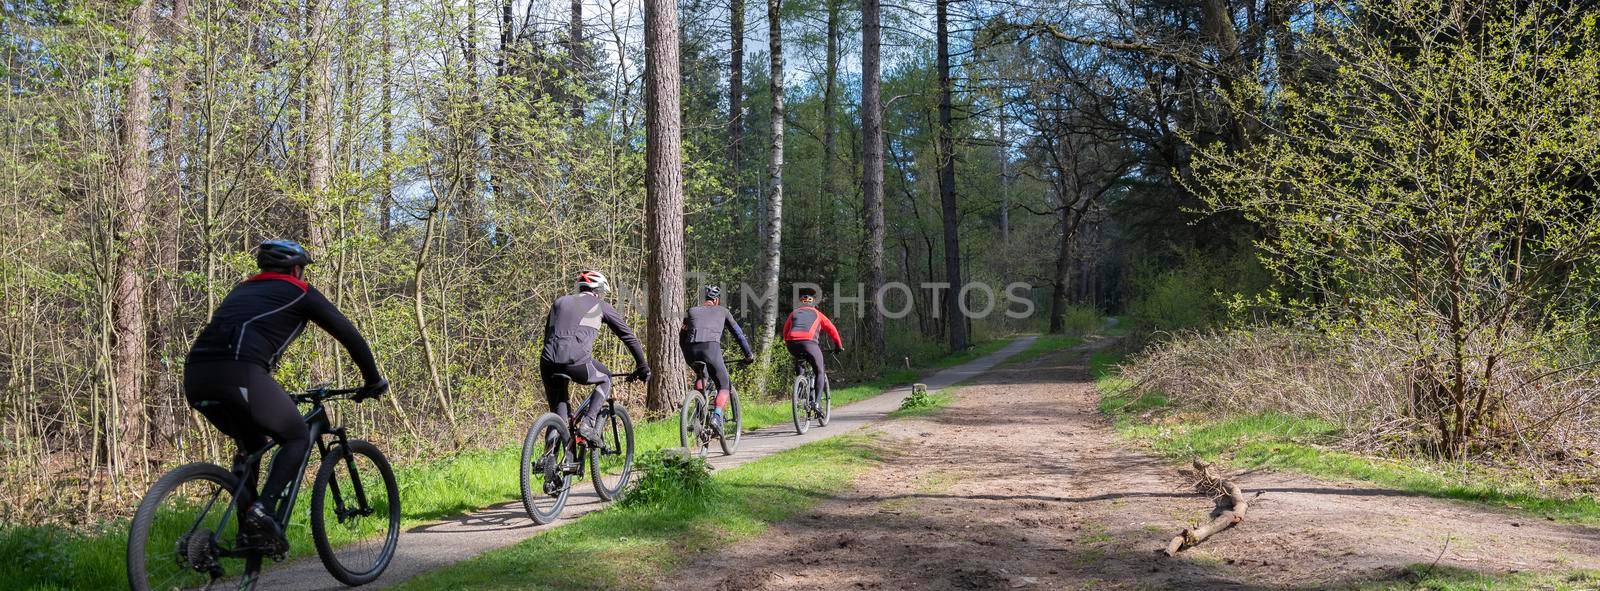 men exercise on bicycle track in spring forest near utrecht on sunny morning in the netherlands